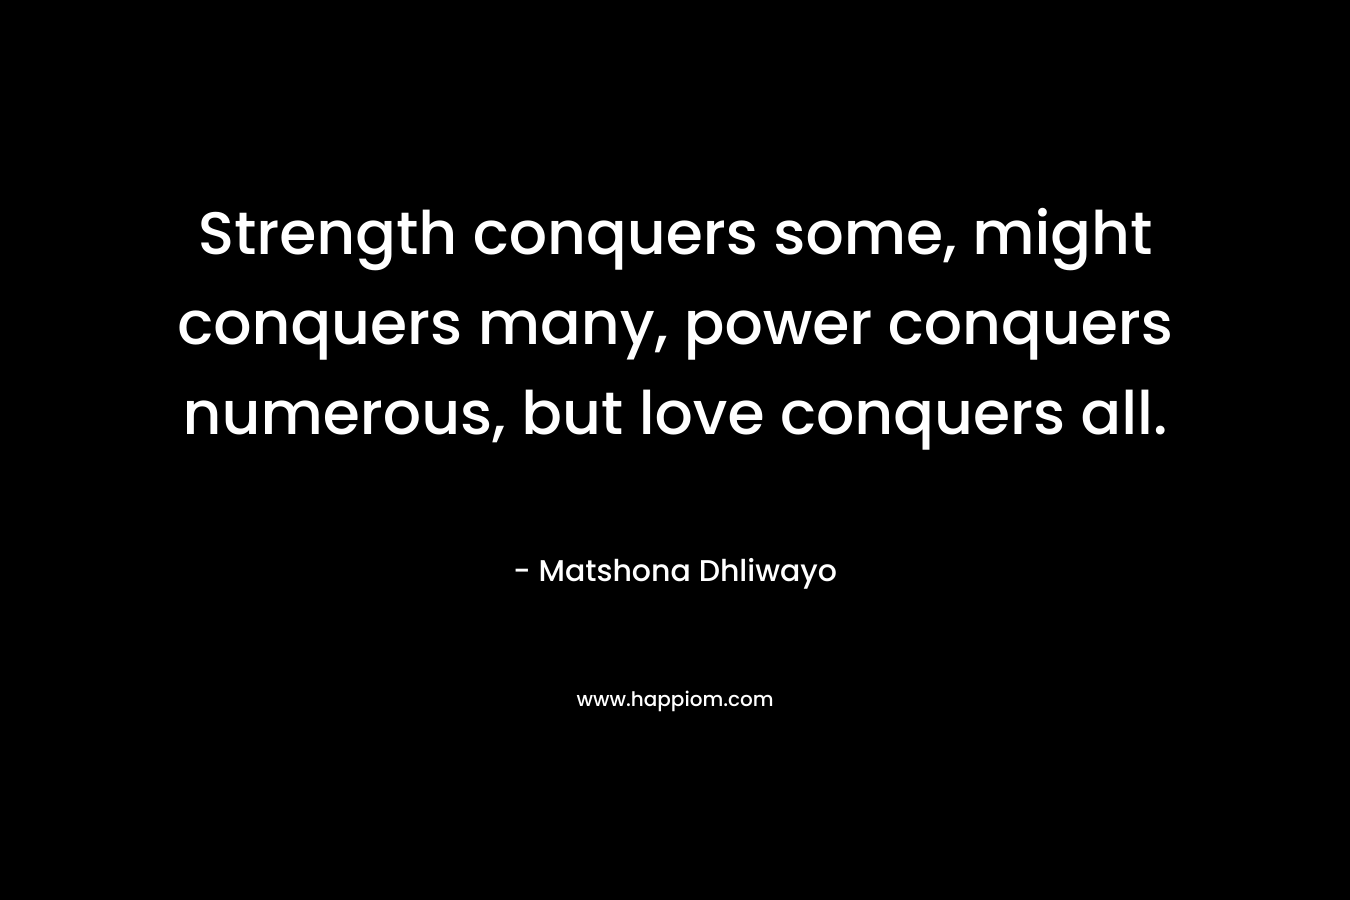 Strength conquers some, might conquers many, power conquers numerous, but love conquers all. – Matshona Dhliwayo